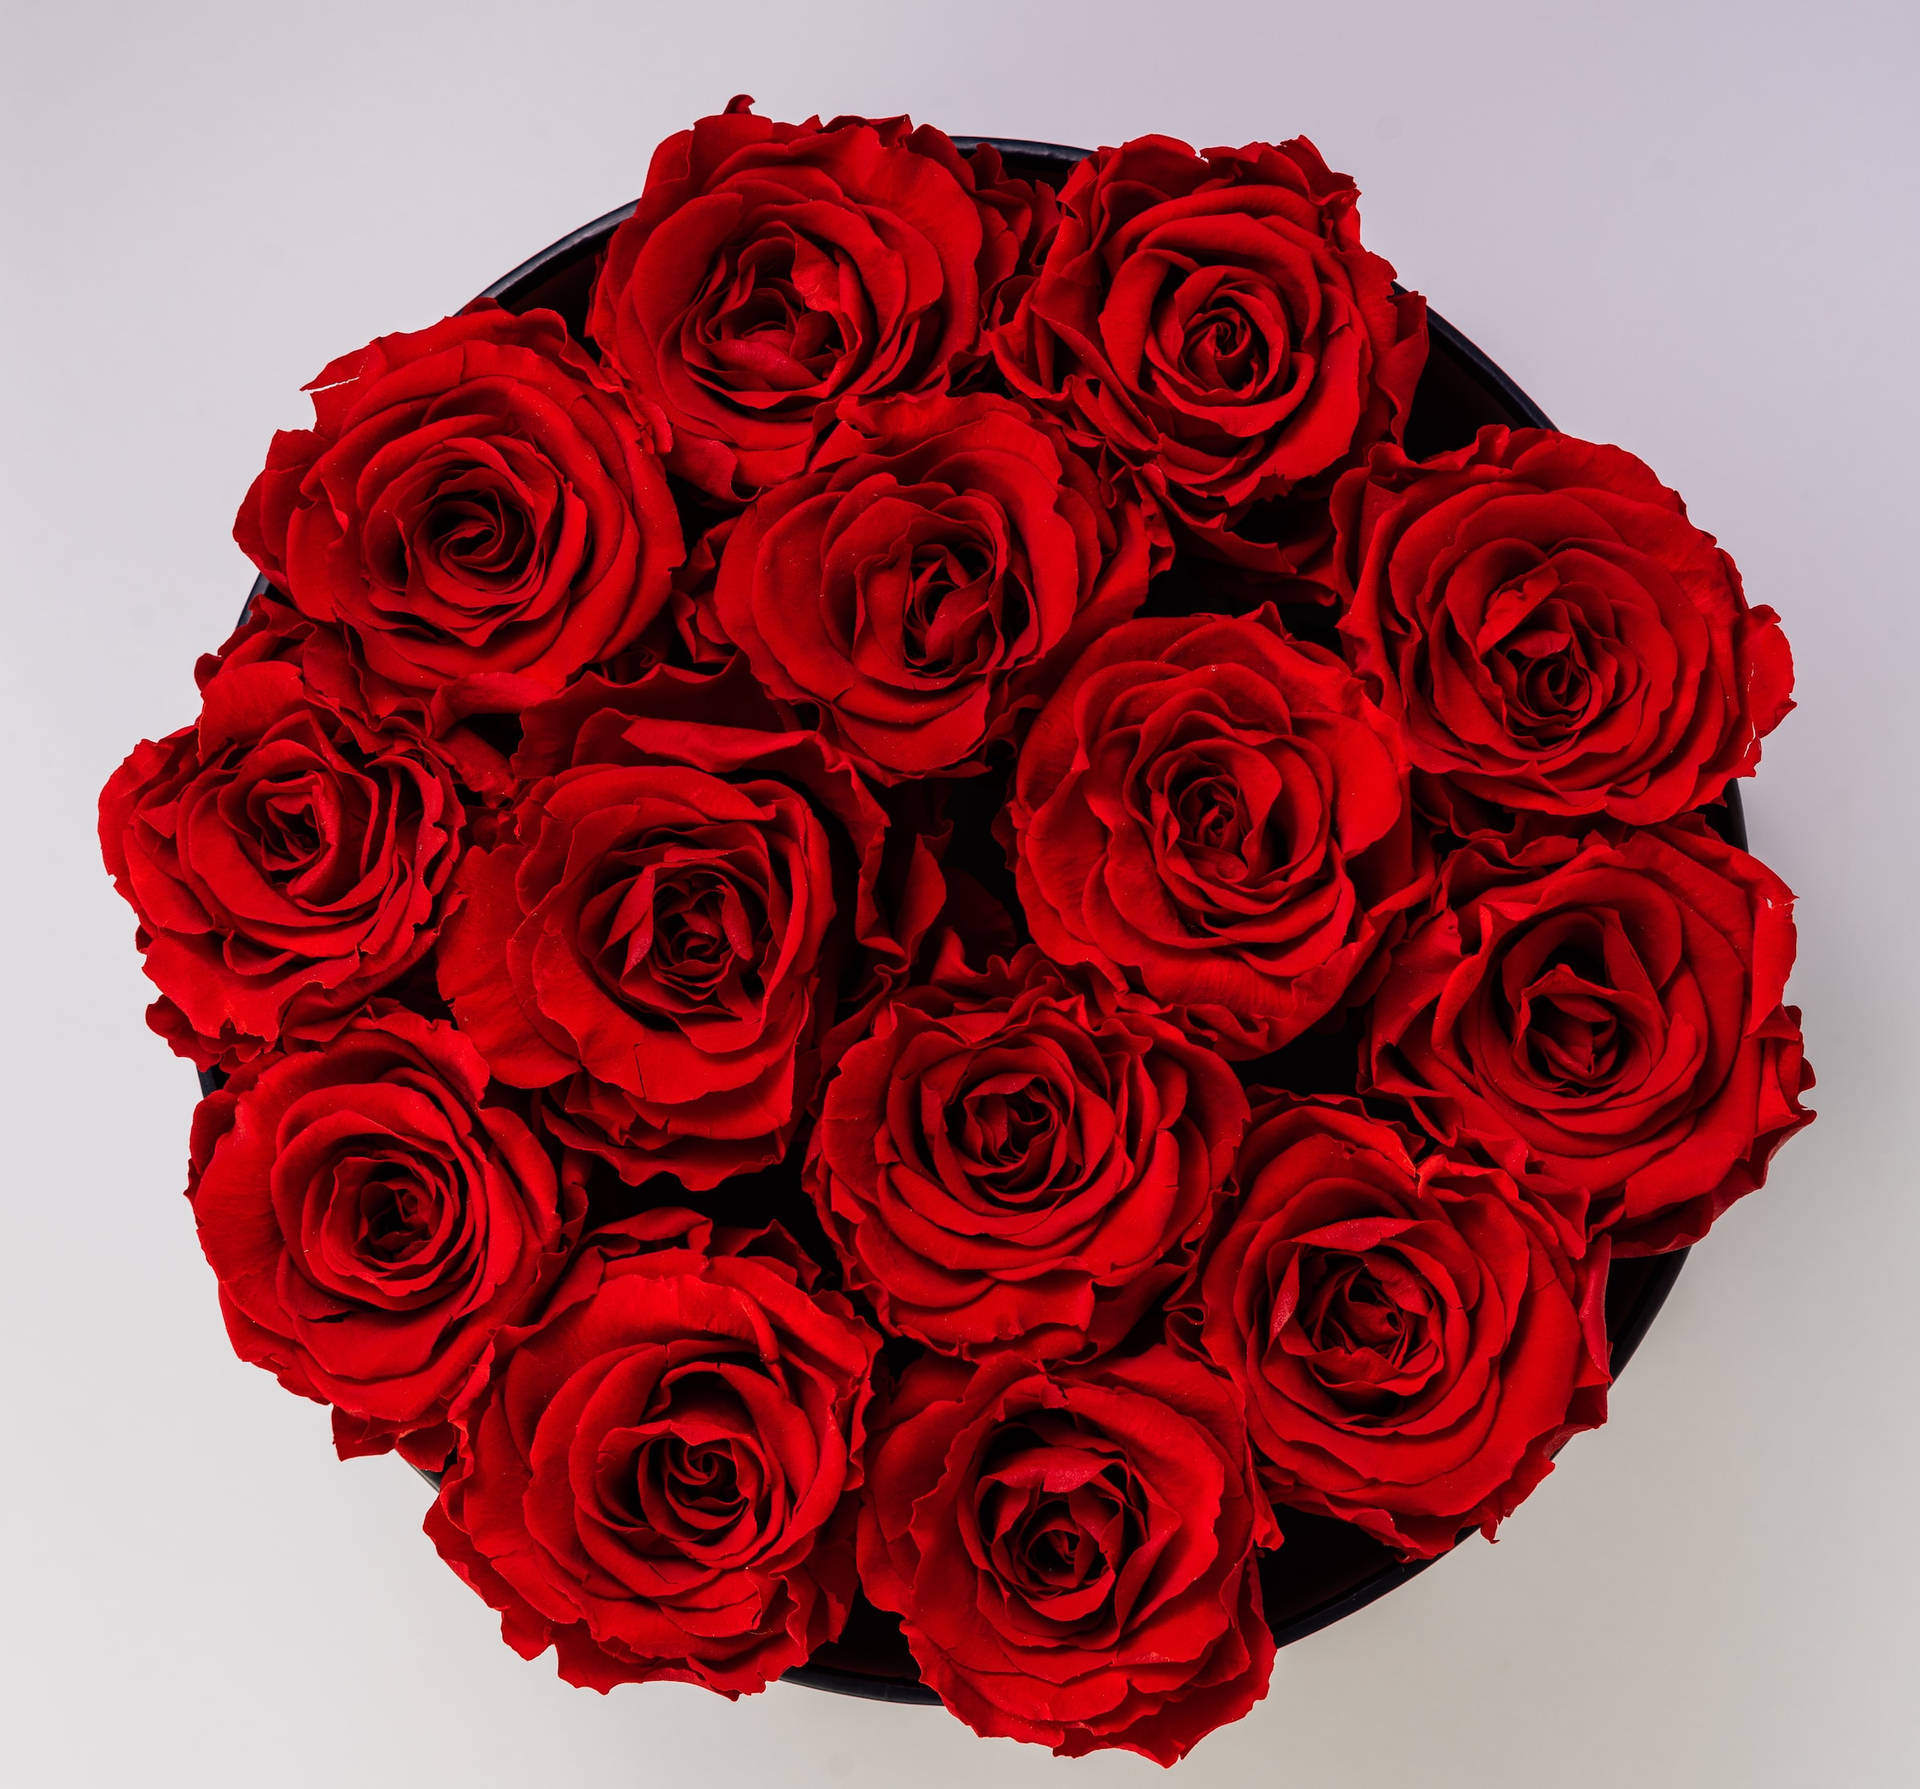 Stunning Red Roses in a Circular Bouquet Wallpaper